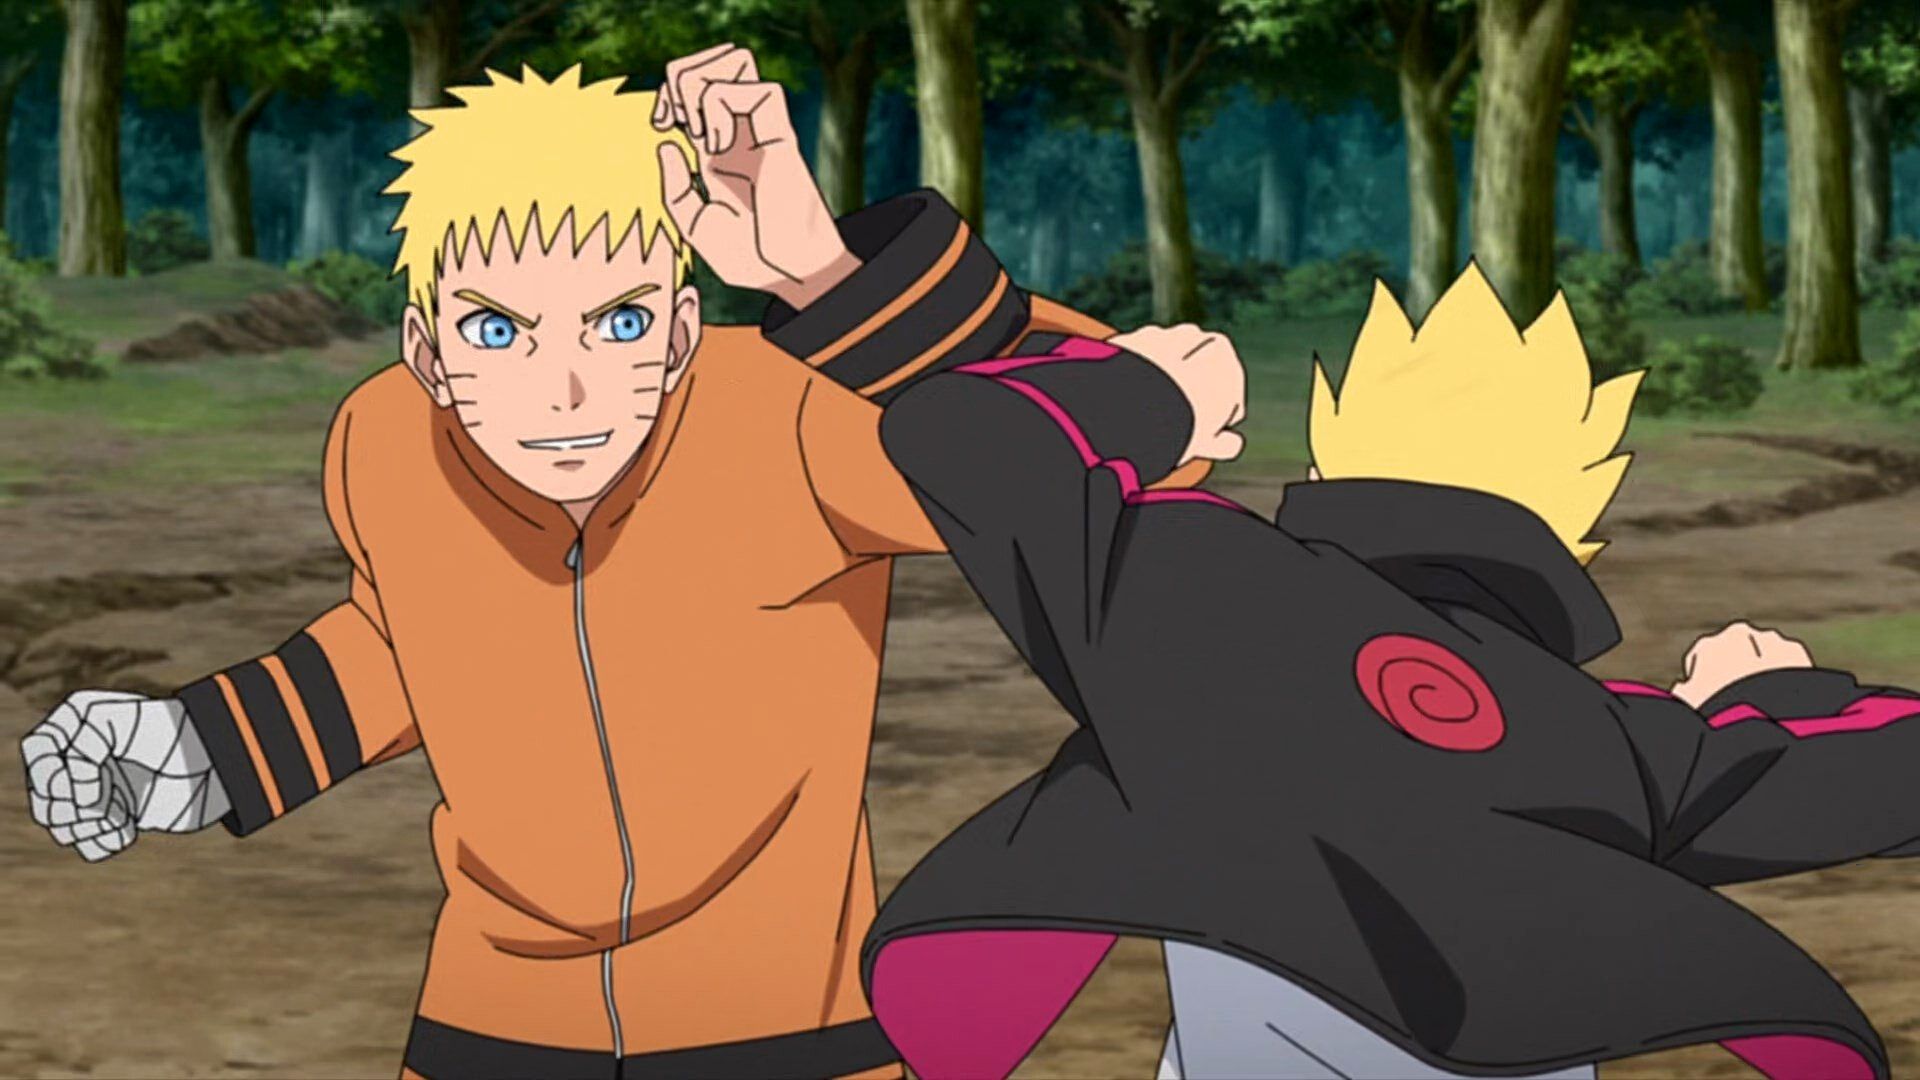 Major Events in Boruto So Far (Spoilers) – Updated Guide January 2023